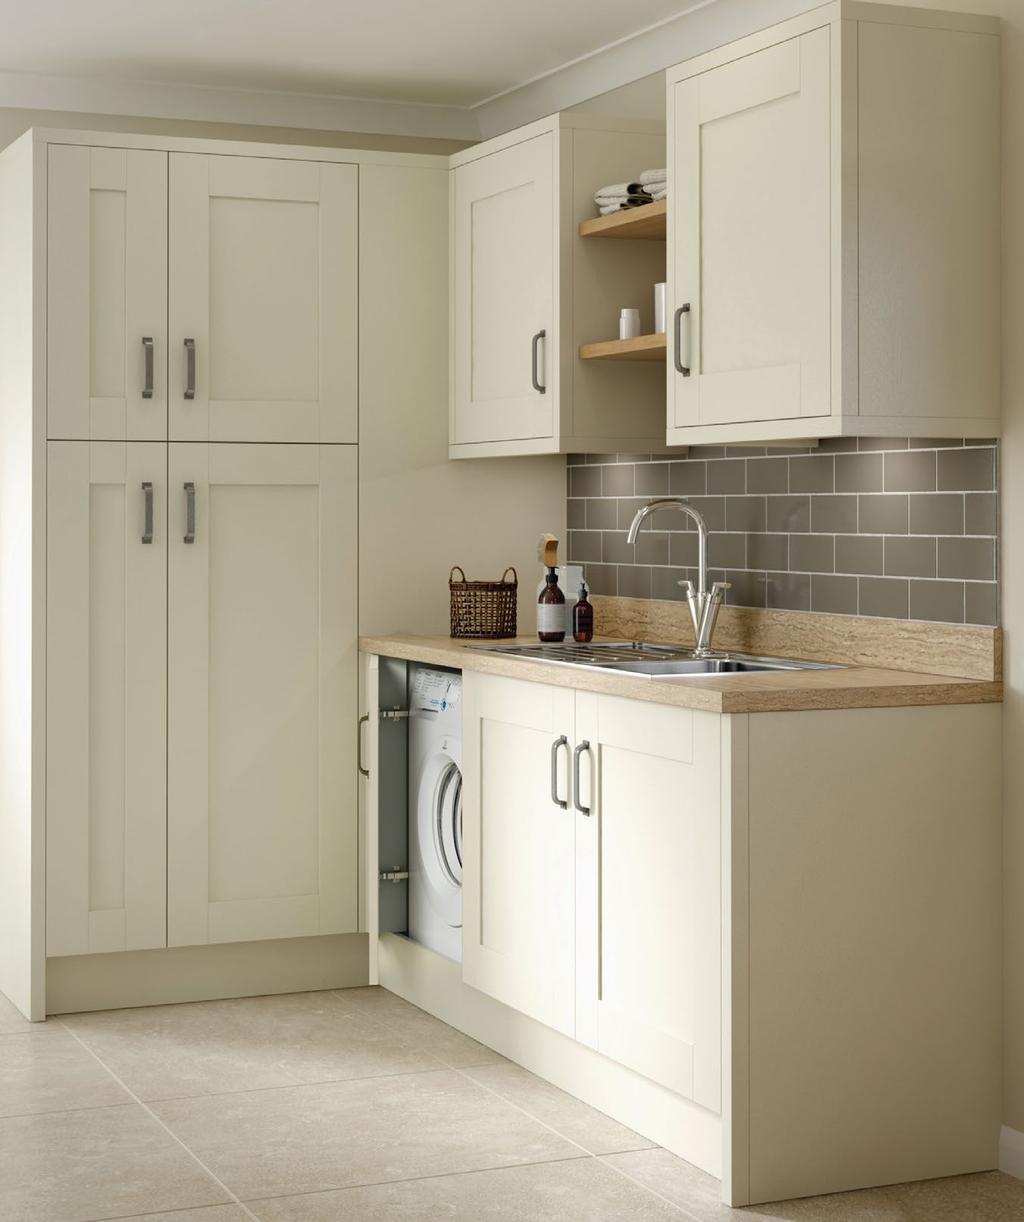 space at the same time as your Mackintosh Kitchen. That way you can ensure a consistent, co-ordinated look.